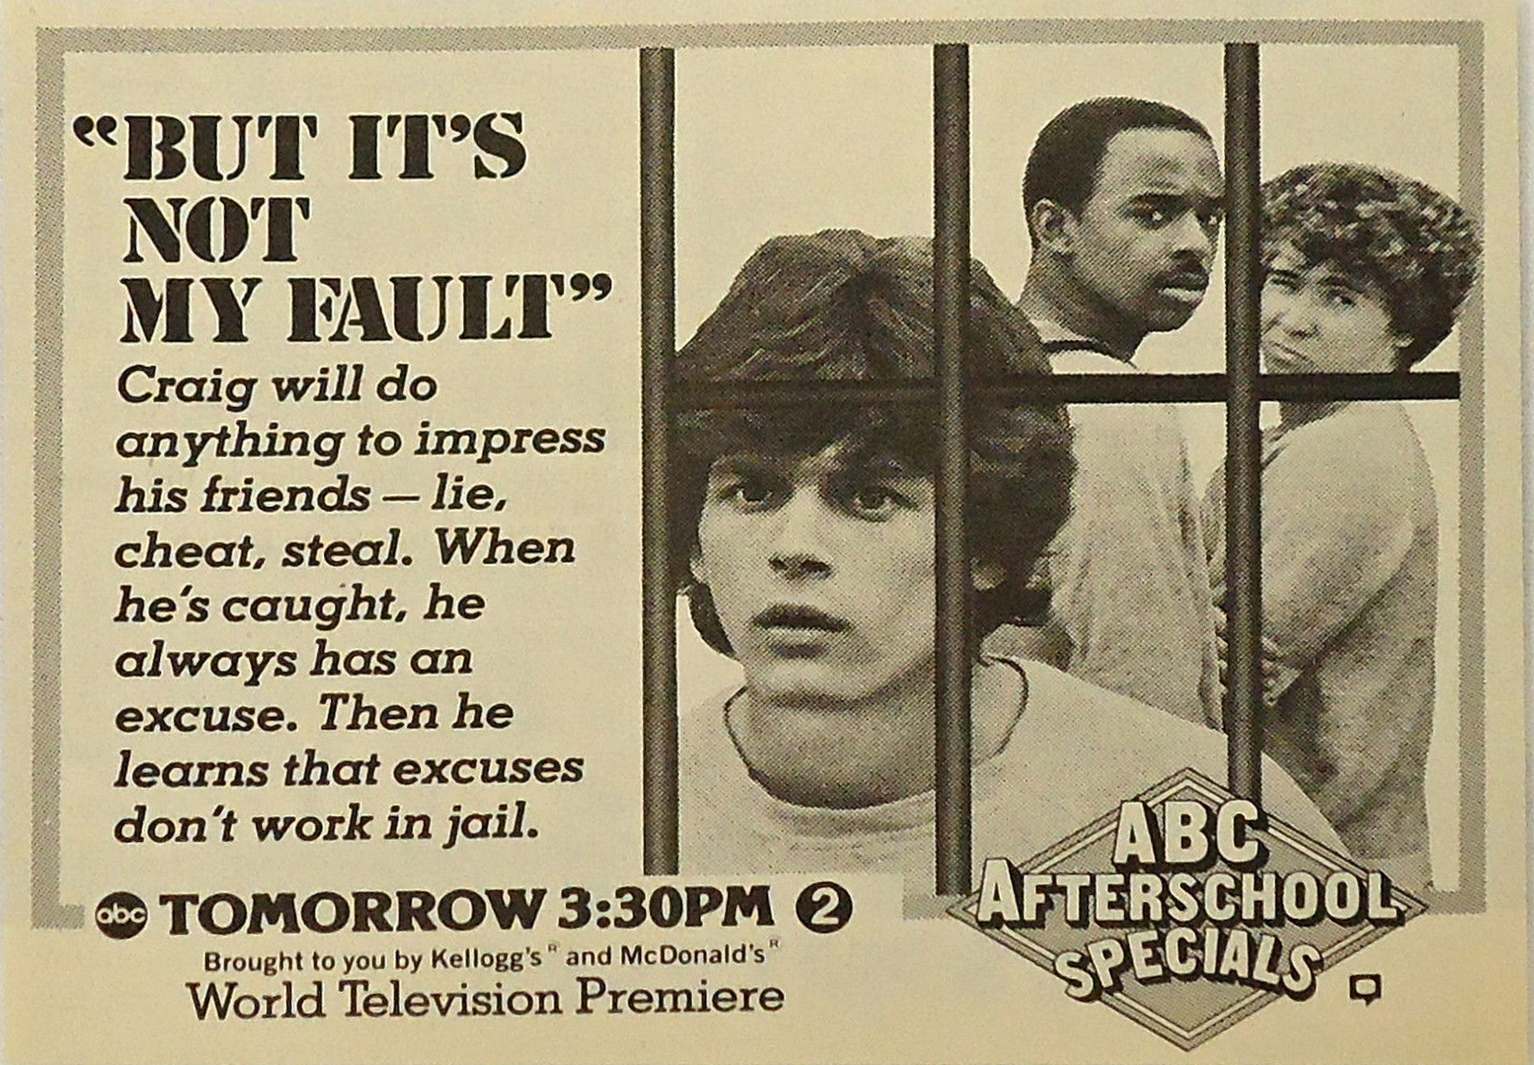 abc after school specials - eBUT It'S Not My Fault" Craig will do anything to impress his friends lie, cheat, steal. When he's caught, he always has an excuse. Then he learns that excuses don't work in jail. obc Tomorrow Pm 2 Brought to you by Kellogg's" 